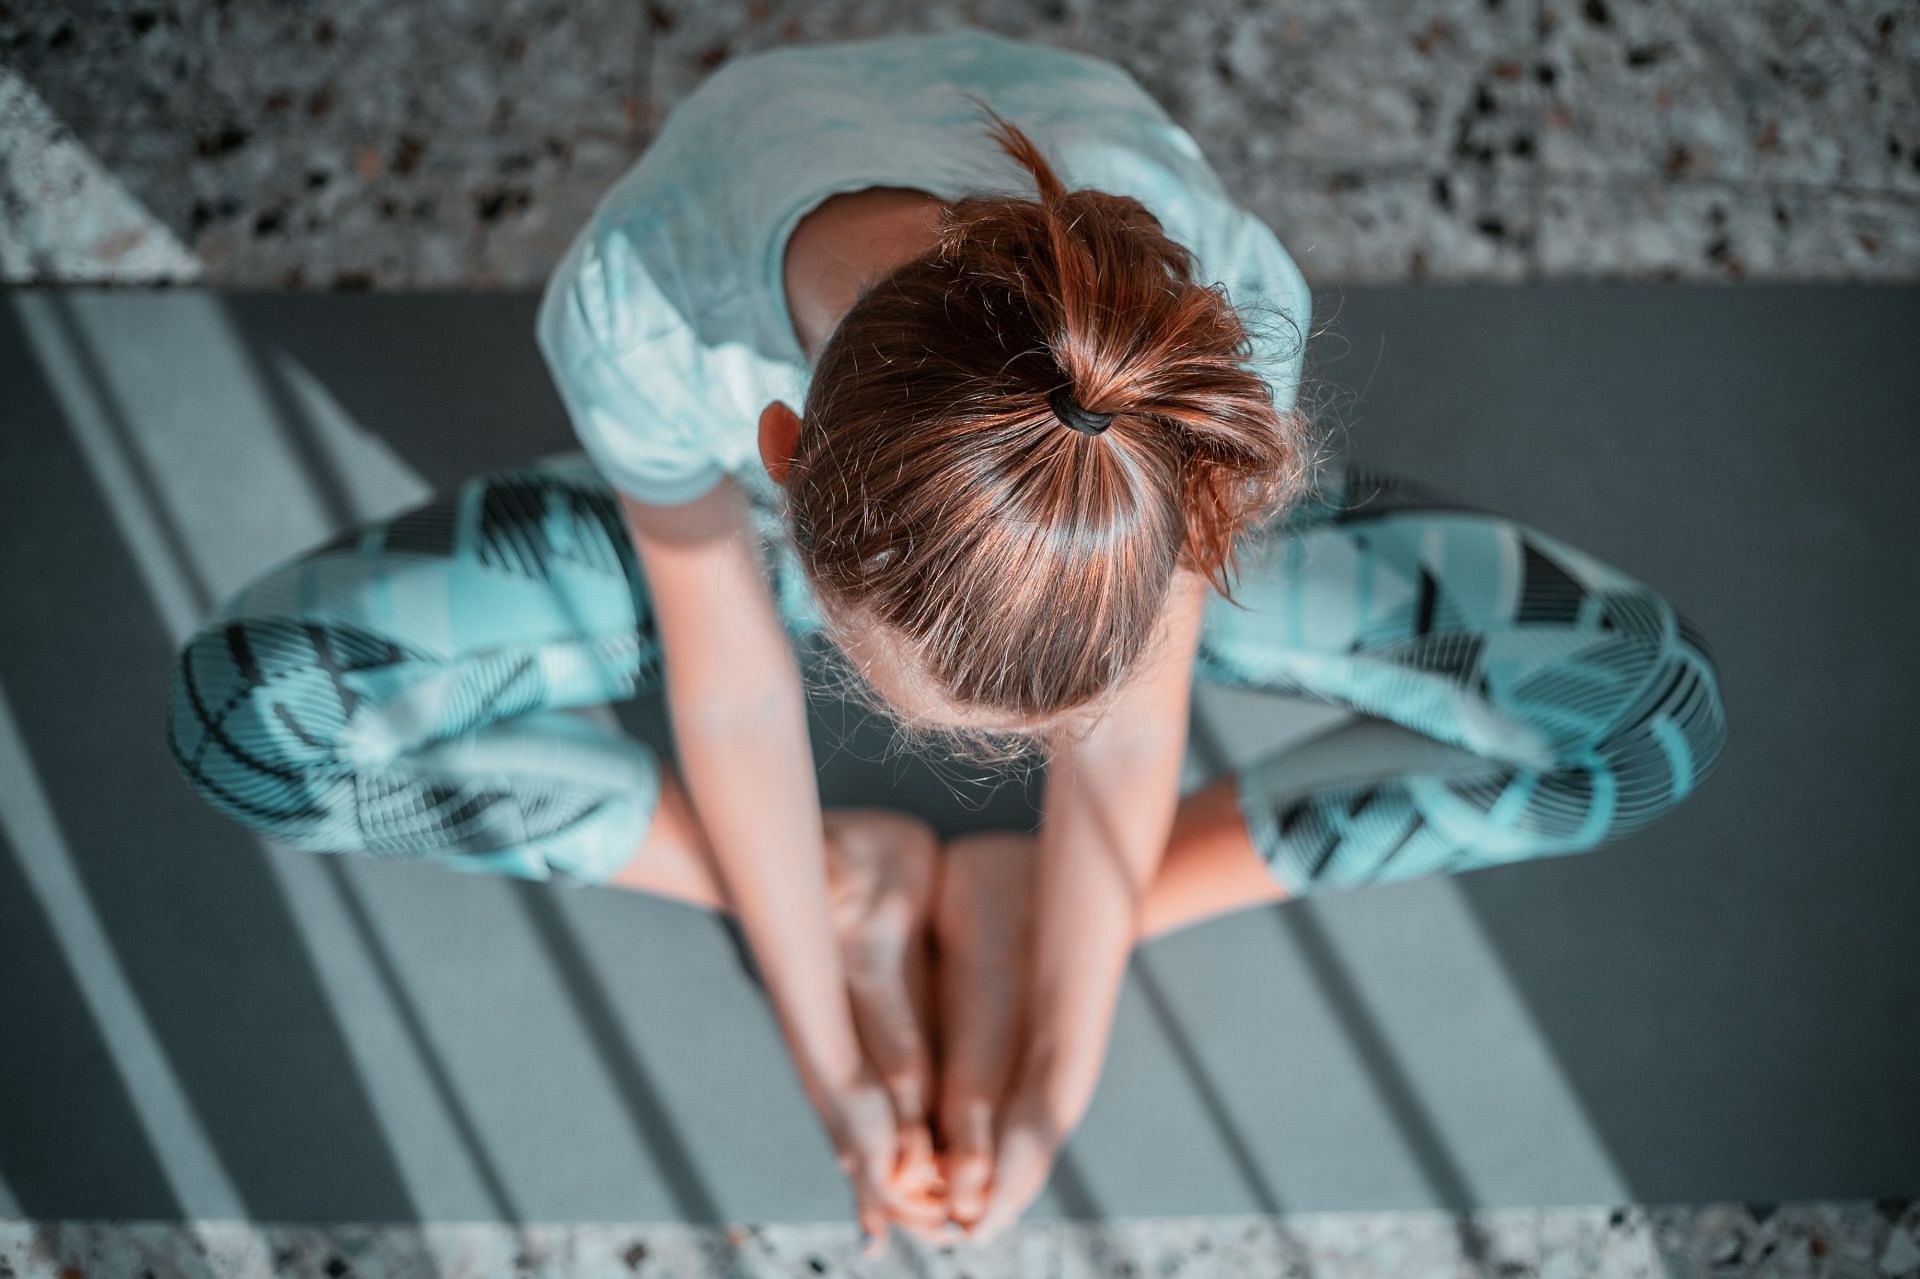 Yoga poses strengthen your knees and increase the flow of blood to your knee muscles. (Image via Unsplash/ Kajetan Sumila)